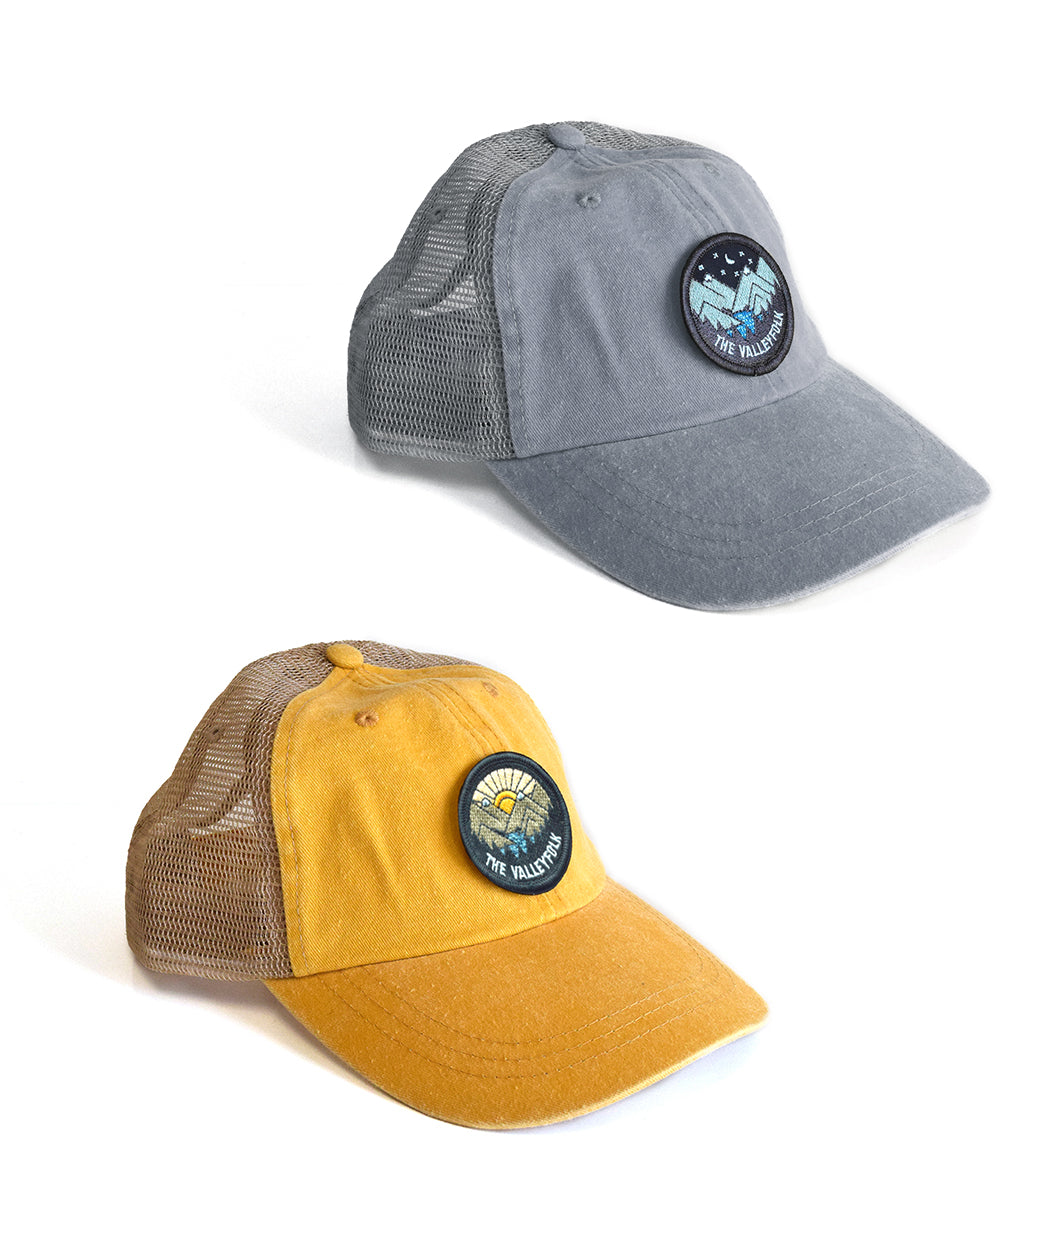 A yellow mesh hat with a patch in the center showing a vector drawn mountain scene with a sun rise in the background and “the Valleyfolk” arched along the bottom. A gray mesh hat with a patch showing a nighttime vector mountain scene with “the Valleyfolk” arched along the bottom - from the Valleyfolk